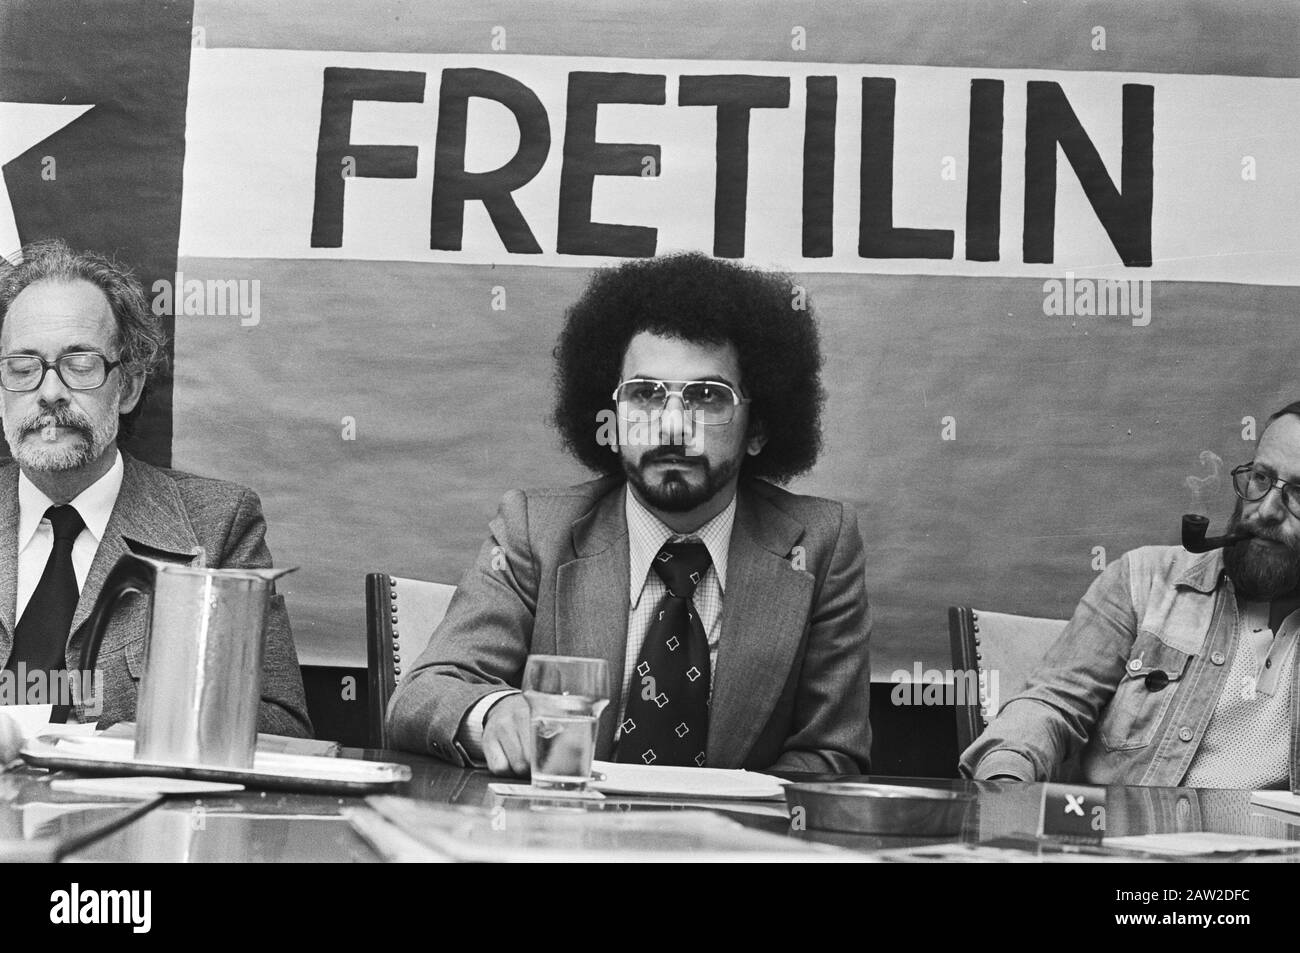 Press conference with Leonel Andrade (Fretilin) and Jose Ramos Horta (East Timor Foreign Affairs Minister and Secretary General Frelimo) in Krasnapolsky. Ramos Horta Date: June 8, 1976 Location: Amsterdam, Indonesia, Indonesia, East Timor Keywords: press conferences, resistance movements Person Name: Andrade Leonel, Frelimo, Fretilin, Ramos Horta Jose Institution Name: Krasnapolsky Stock Photo